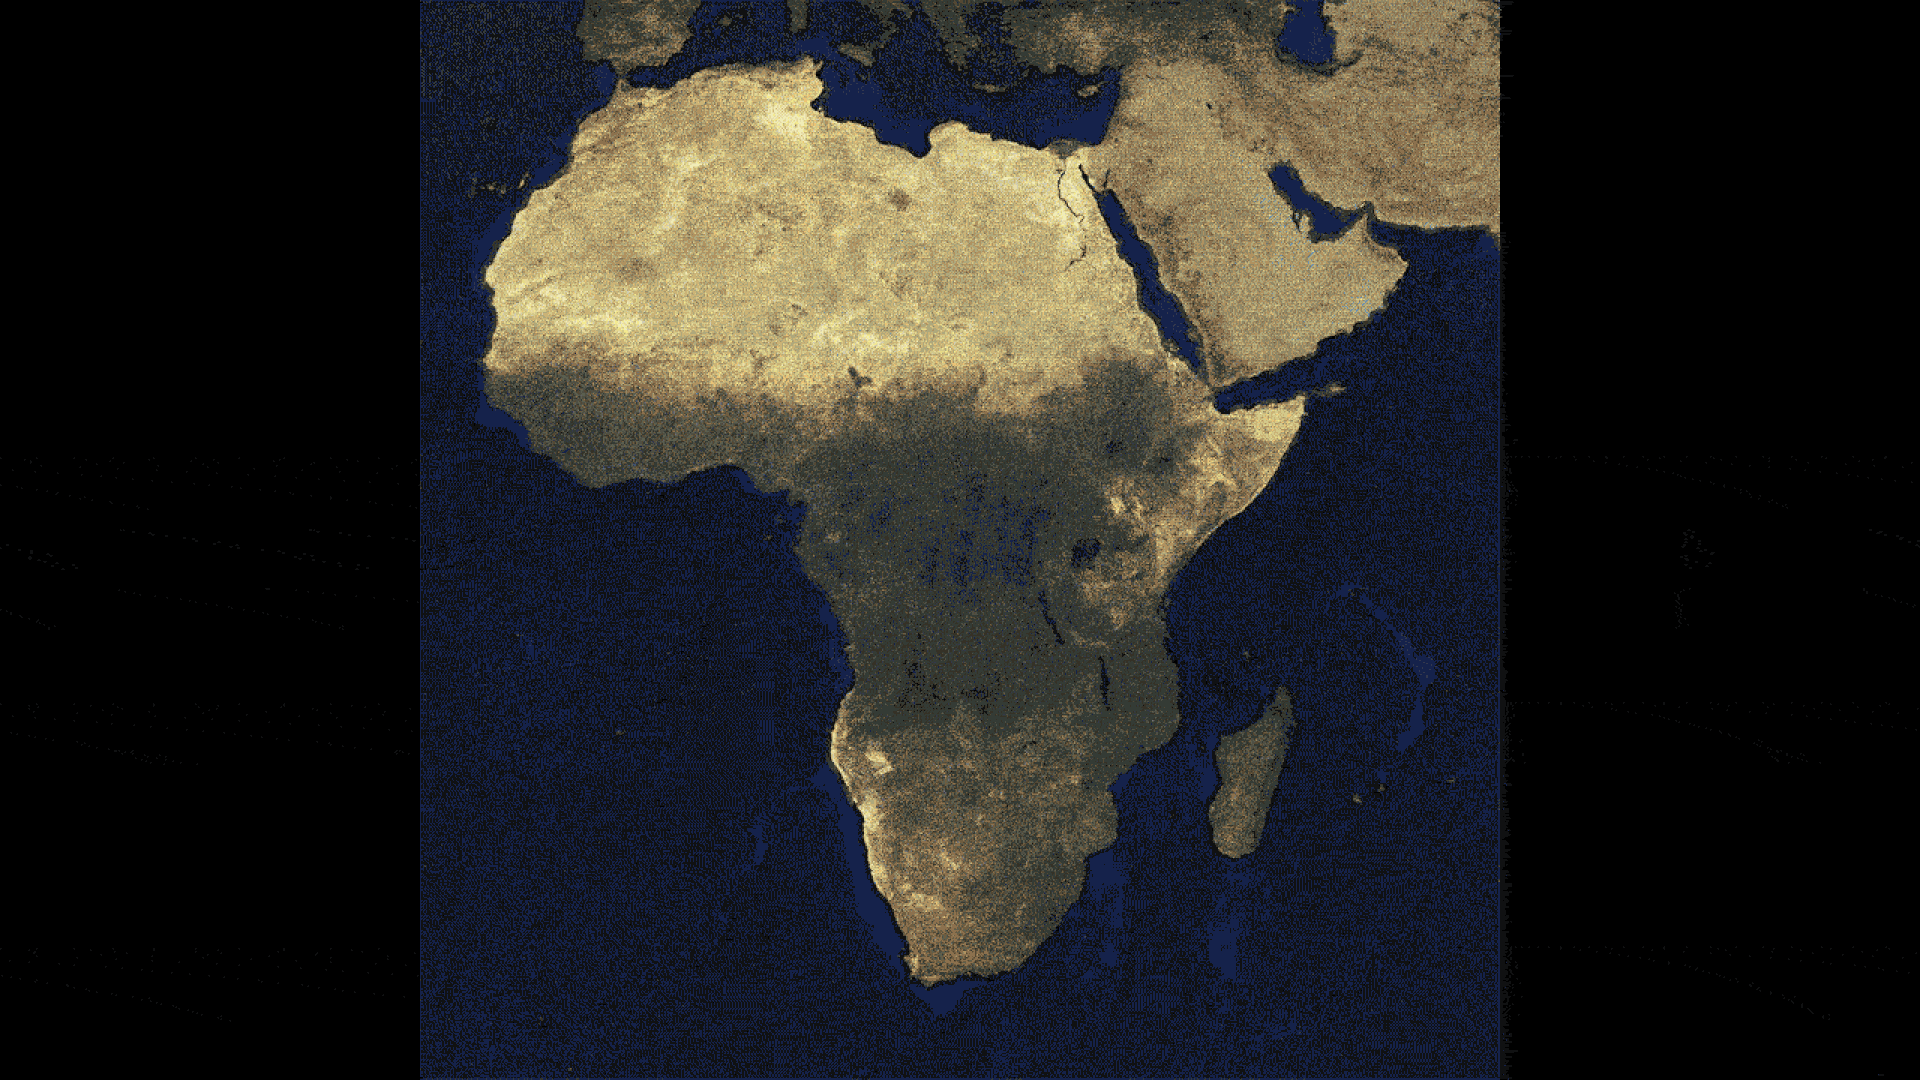 Animation of a population density map of Africa